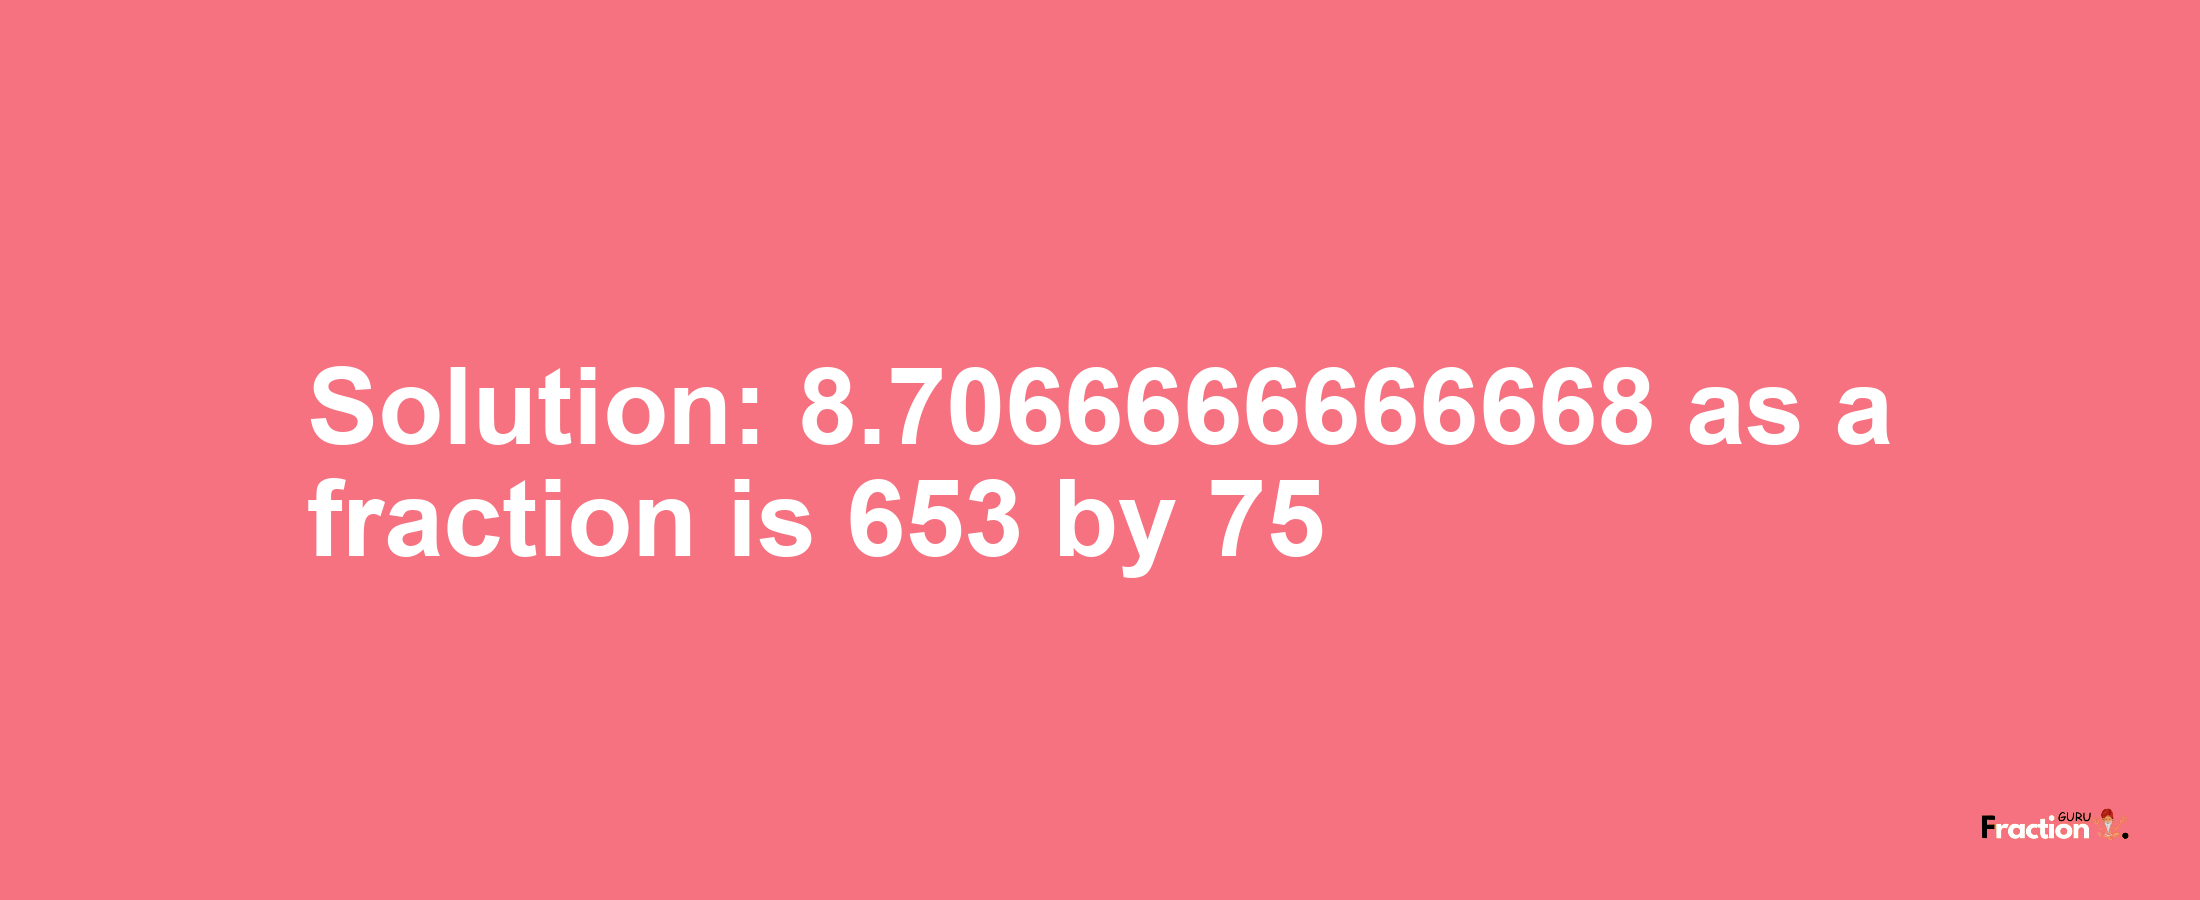 Solution:8.7066666666668 as a fraction is 653/75